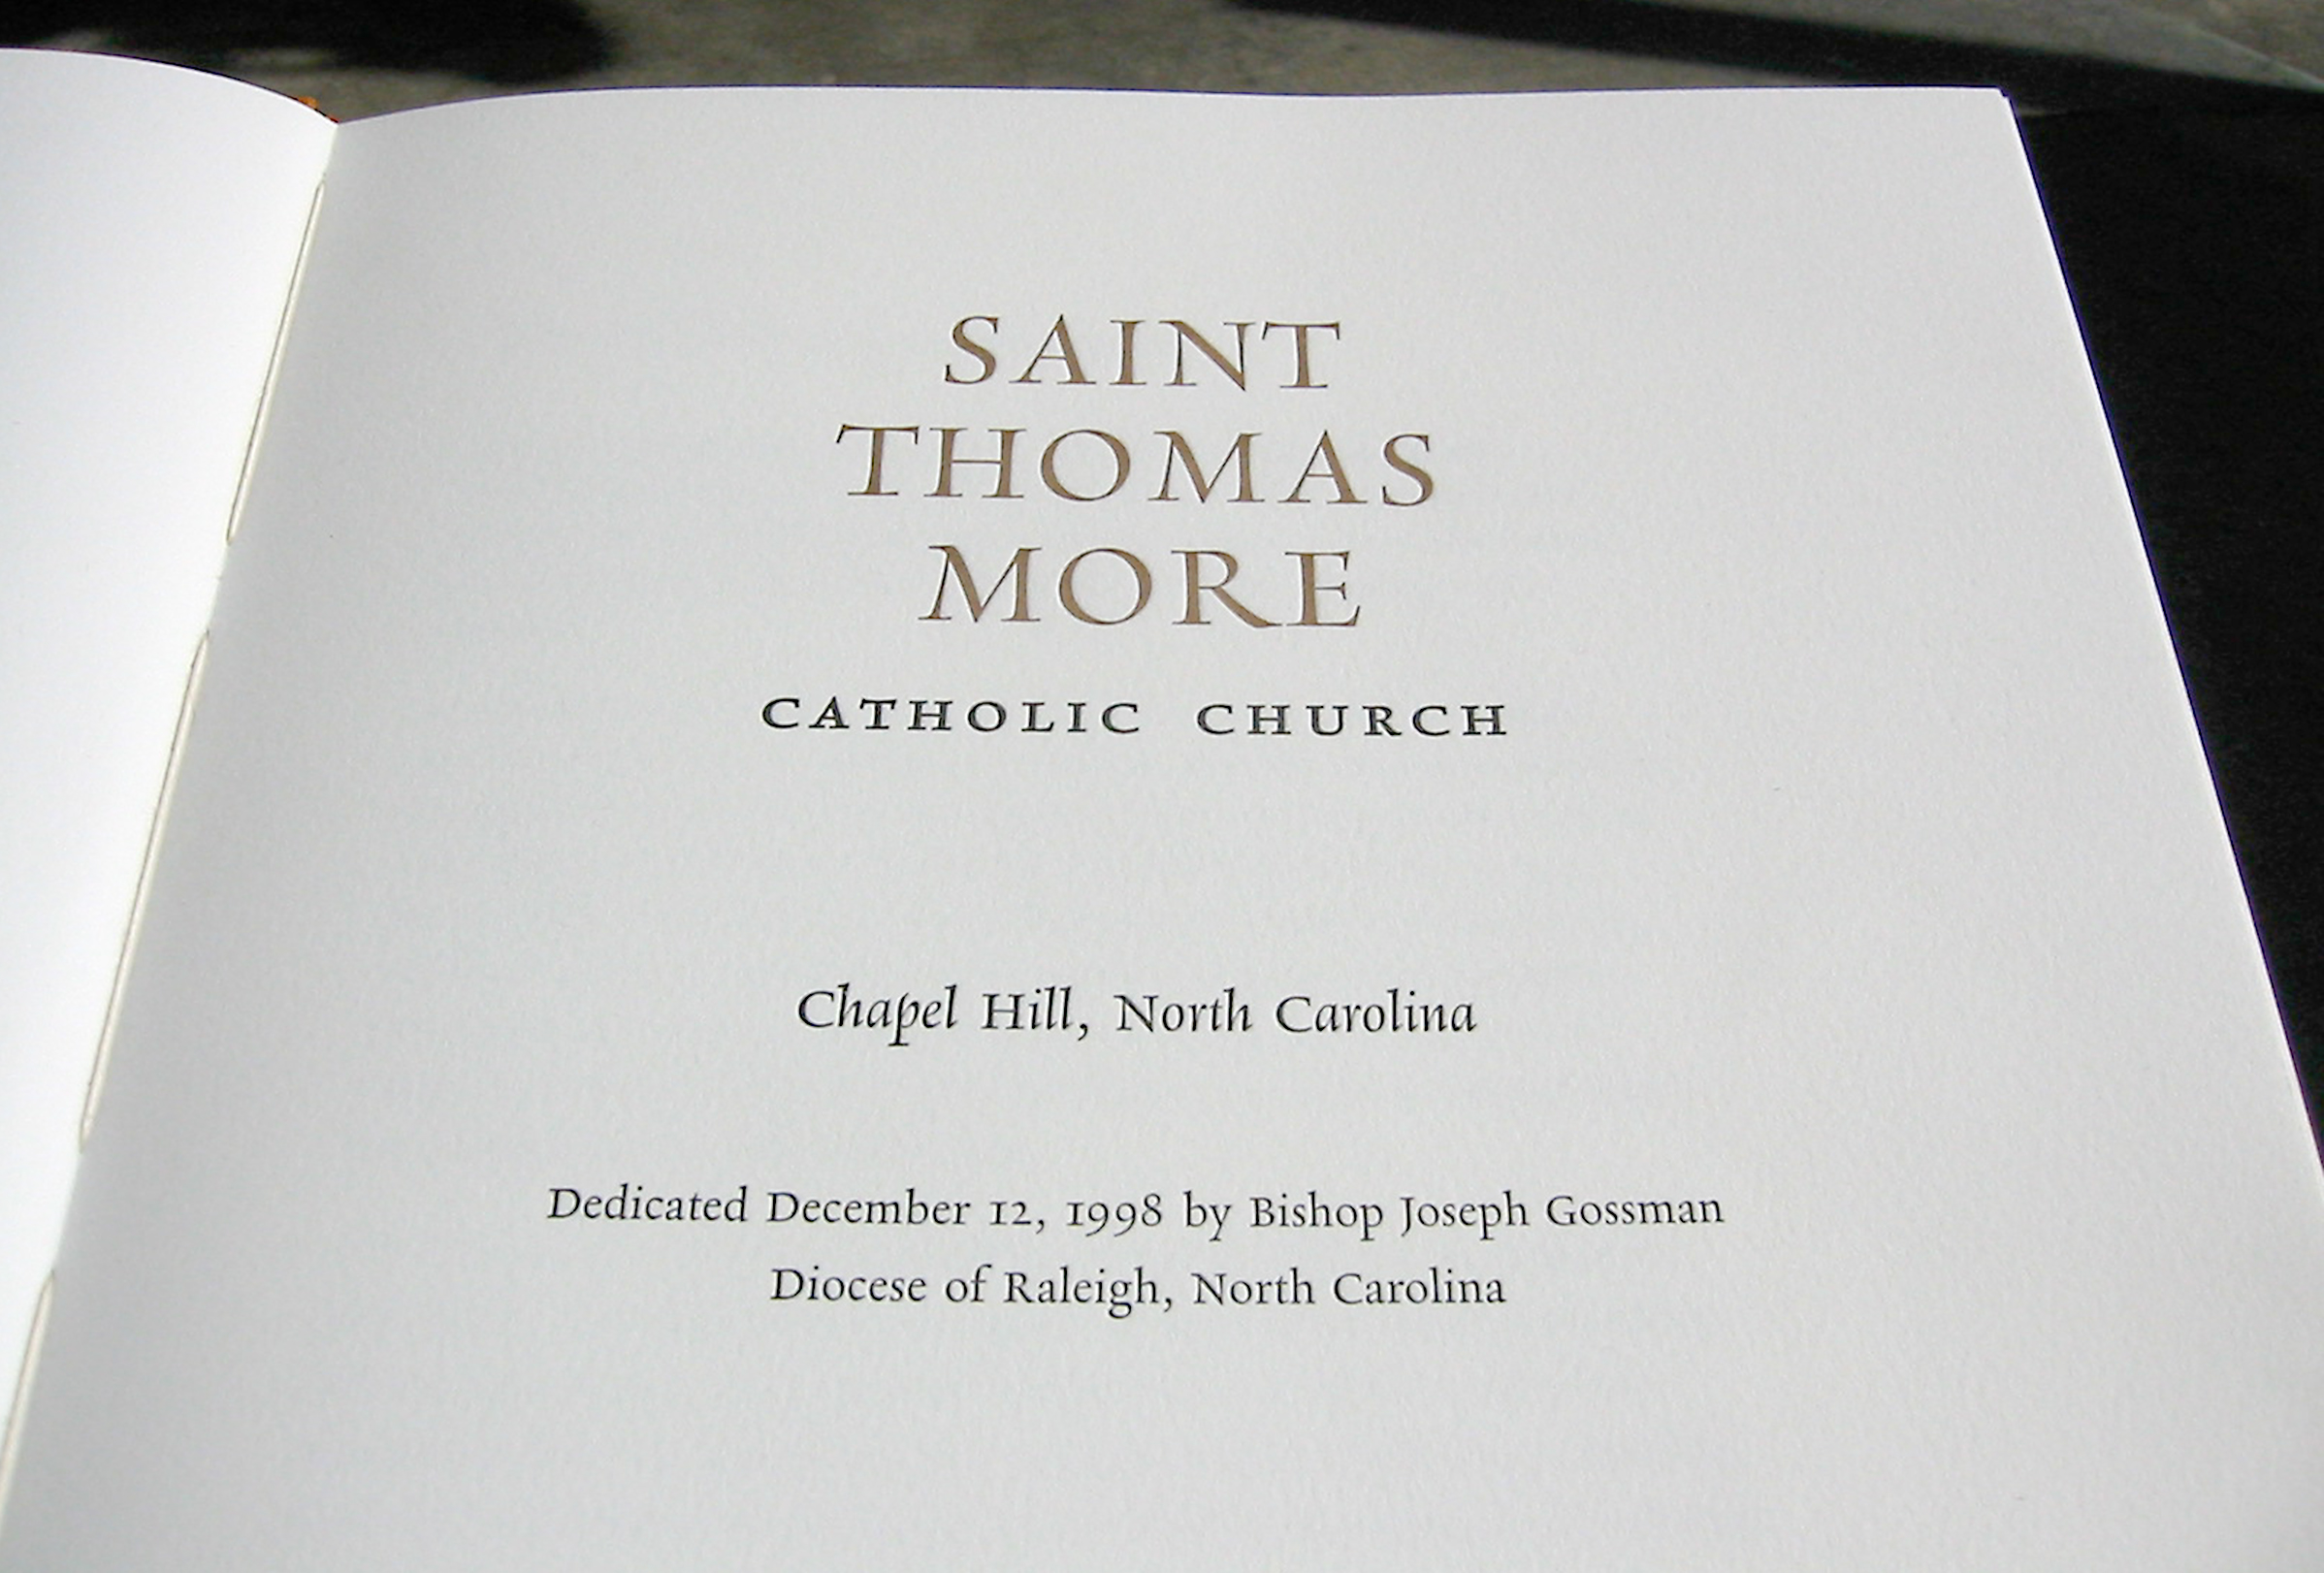  Title page for book that celebrated donors’ gifts and provides a history of the church’s founding. 